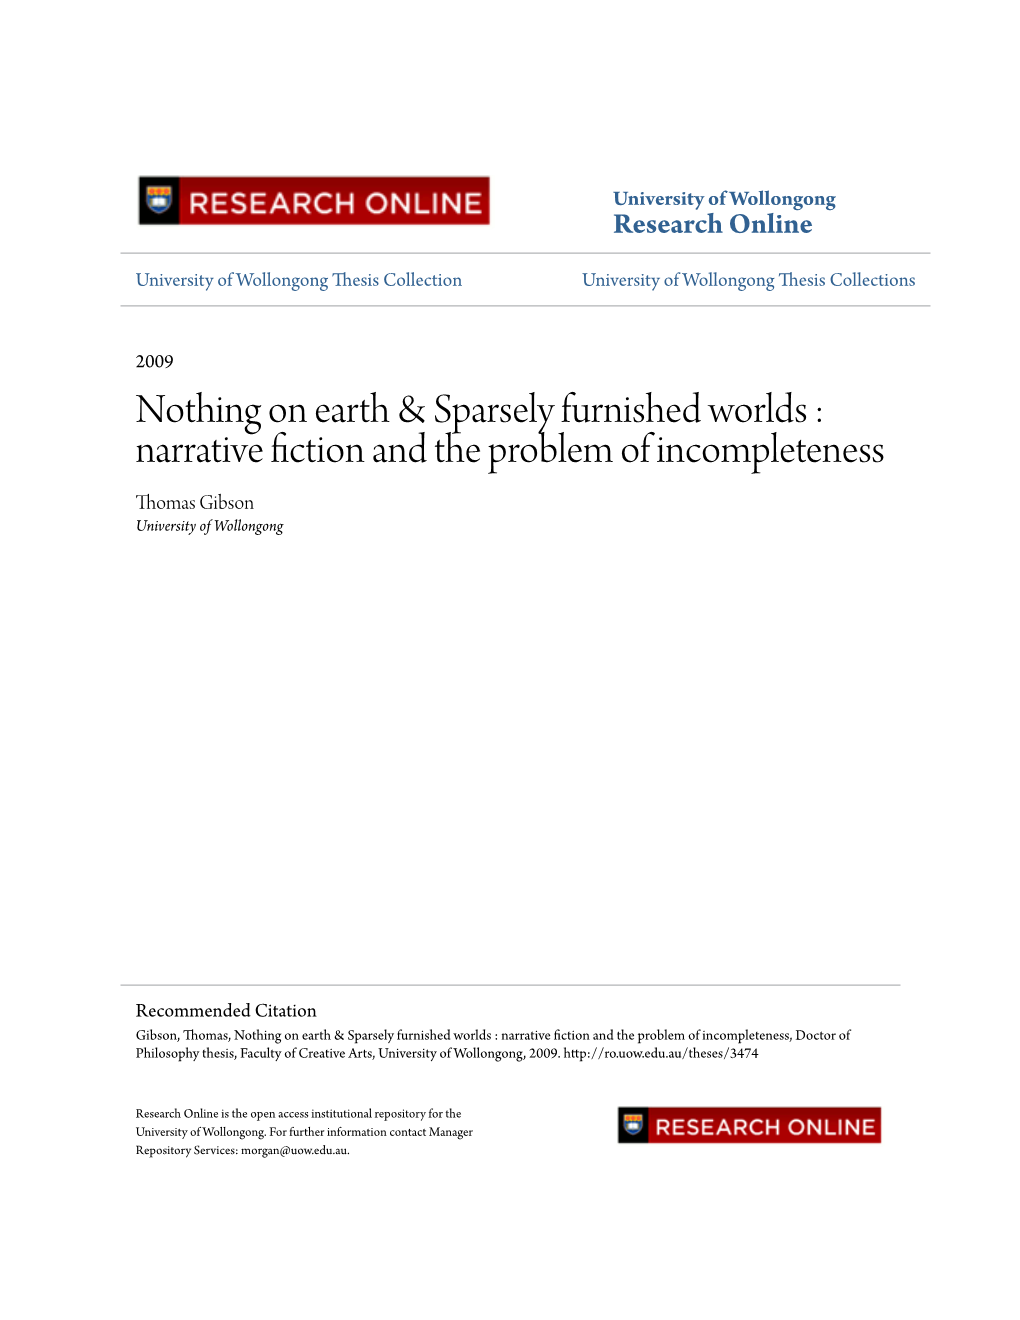 Nothing on Earth & Sparsely Furnished Worlds : Narrative Fiction and The